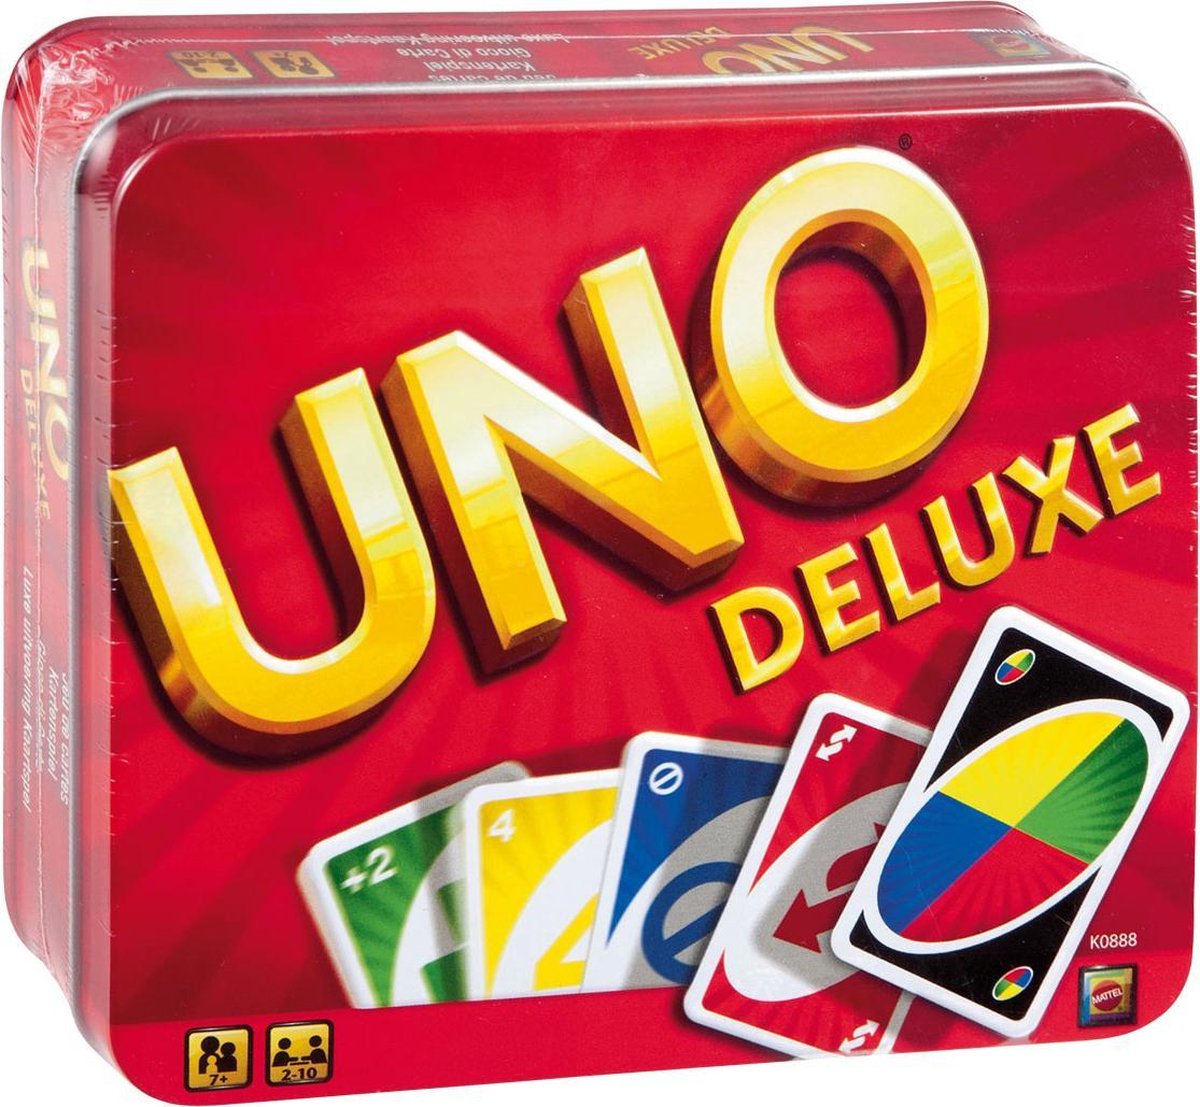 Games Uno Deluxe, Jeux